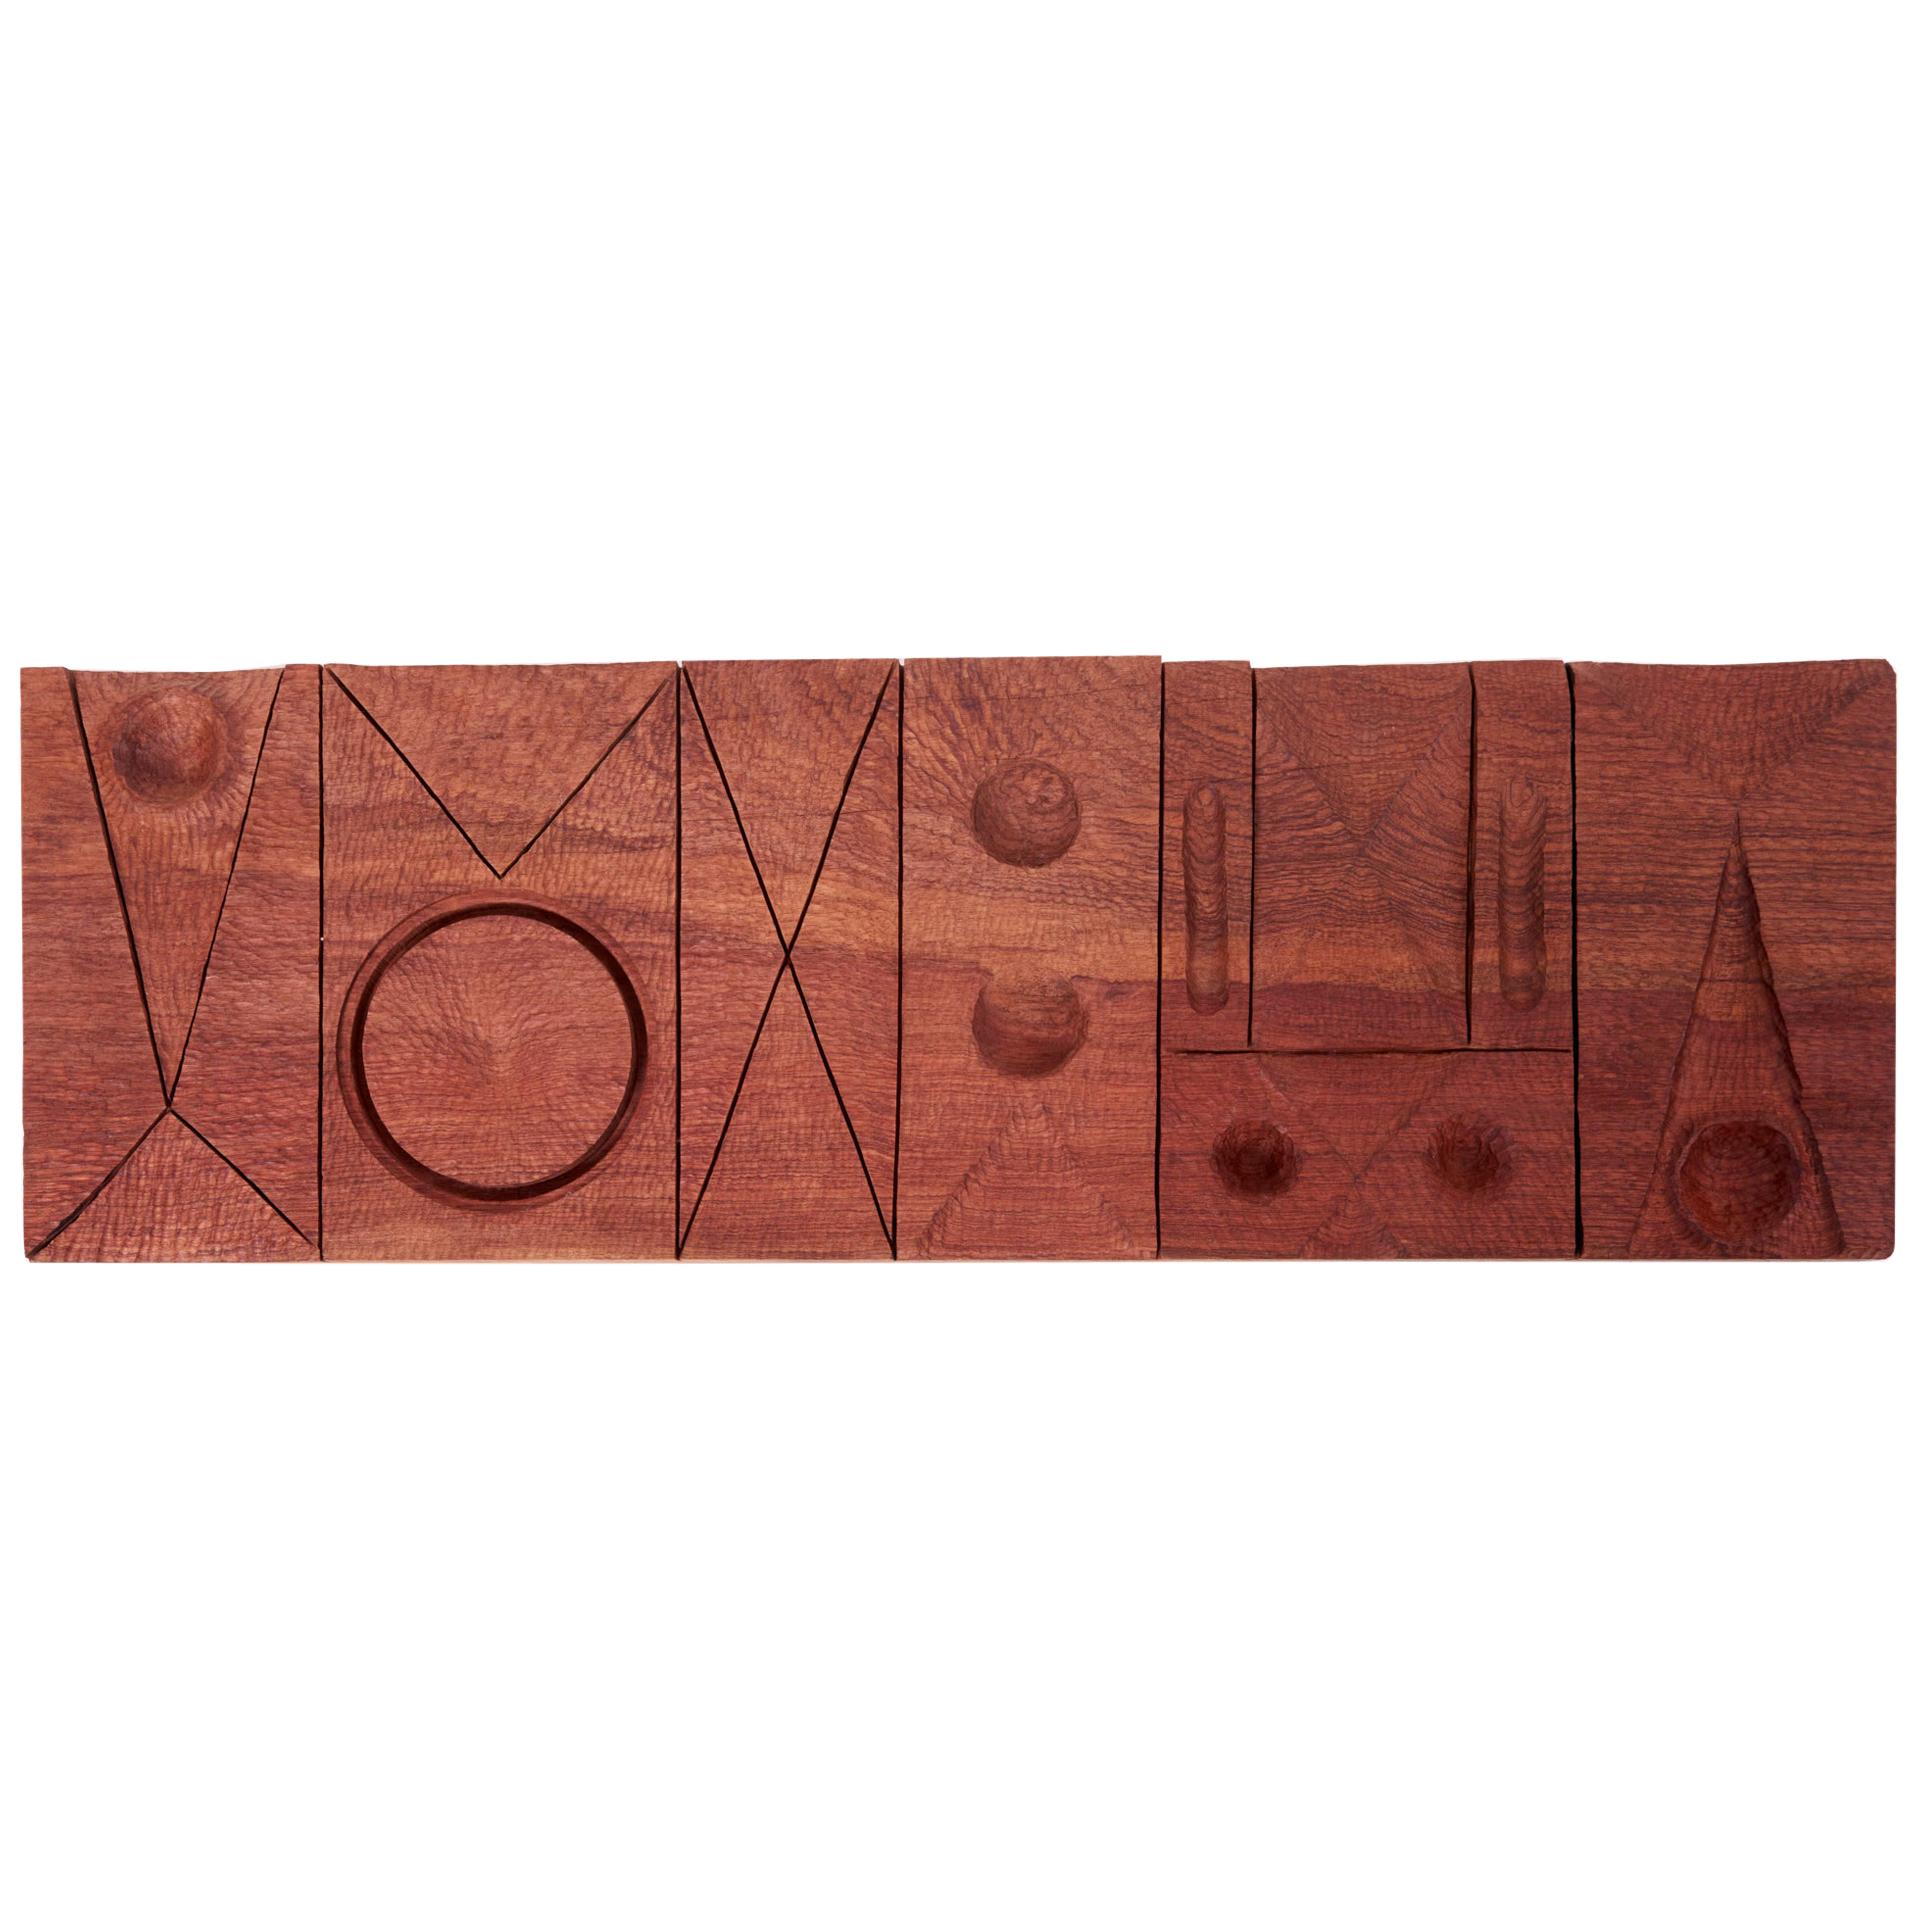 Studio Wood Wall Sculpture Panel by Michael Rozell, US, 2020